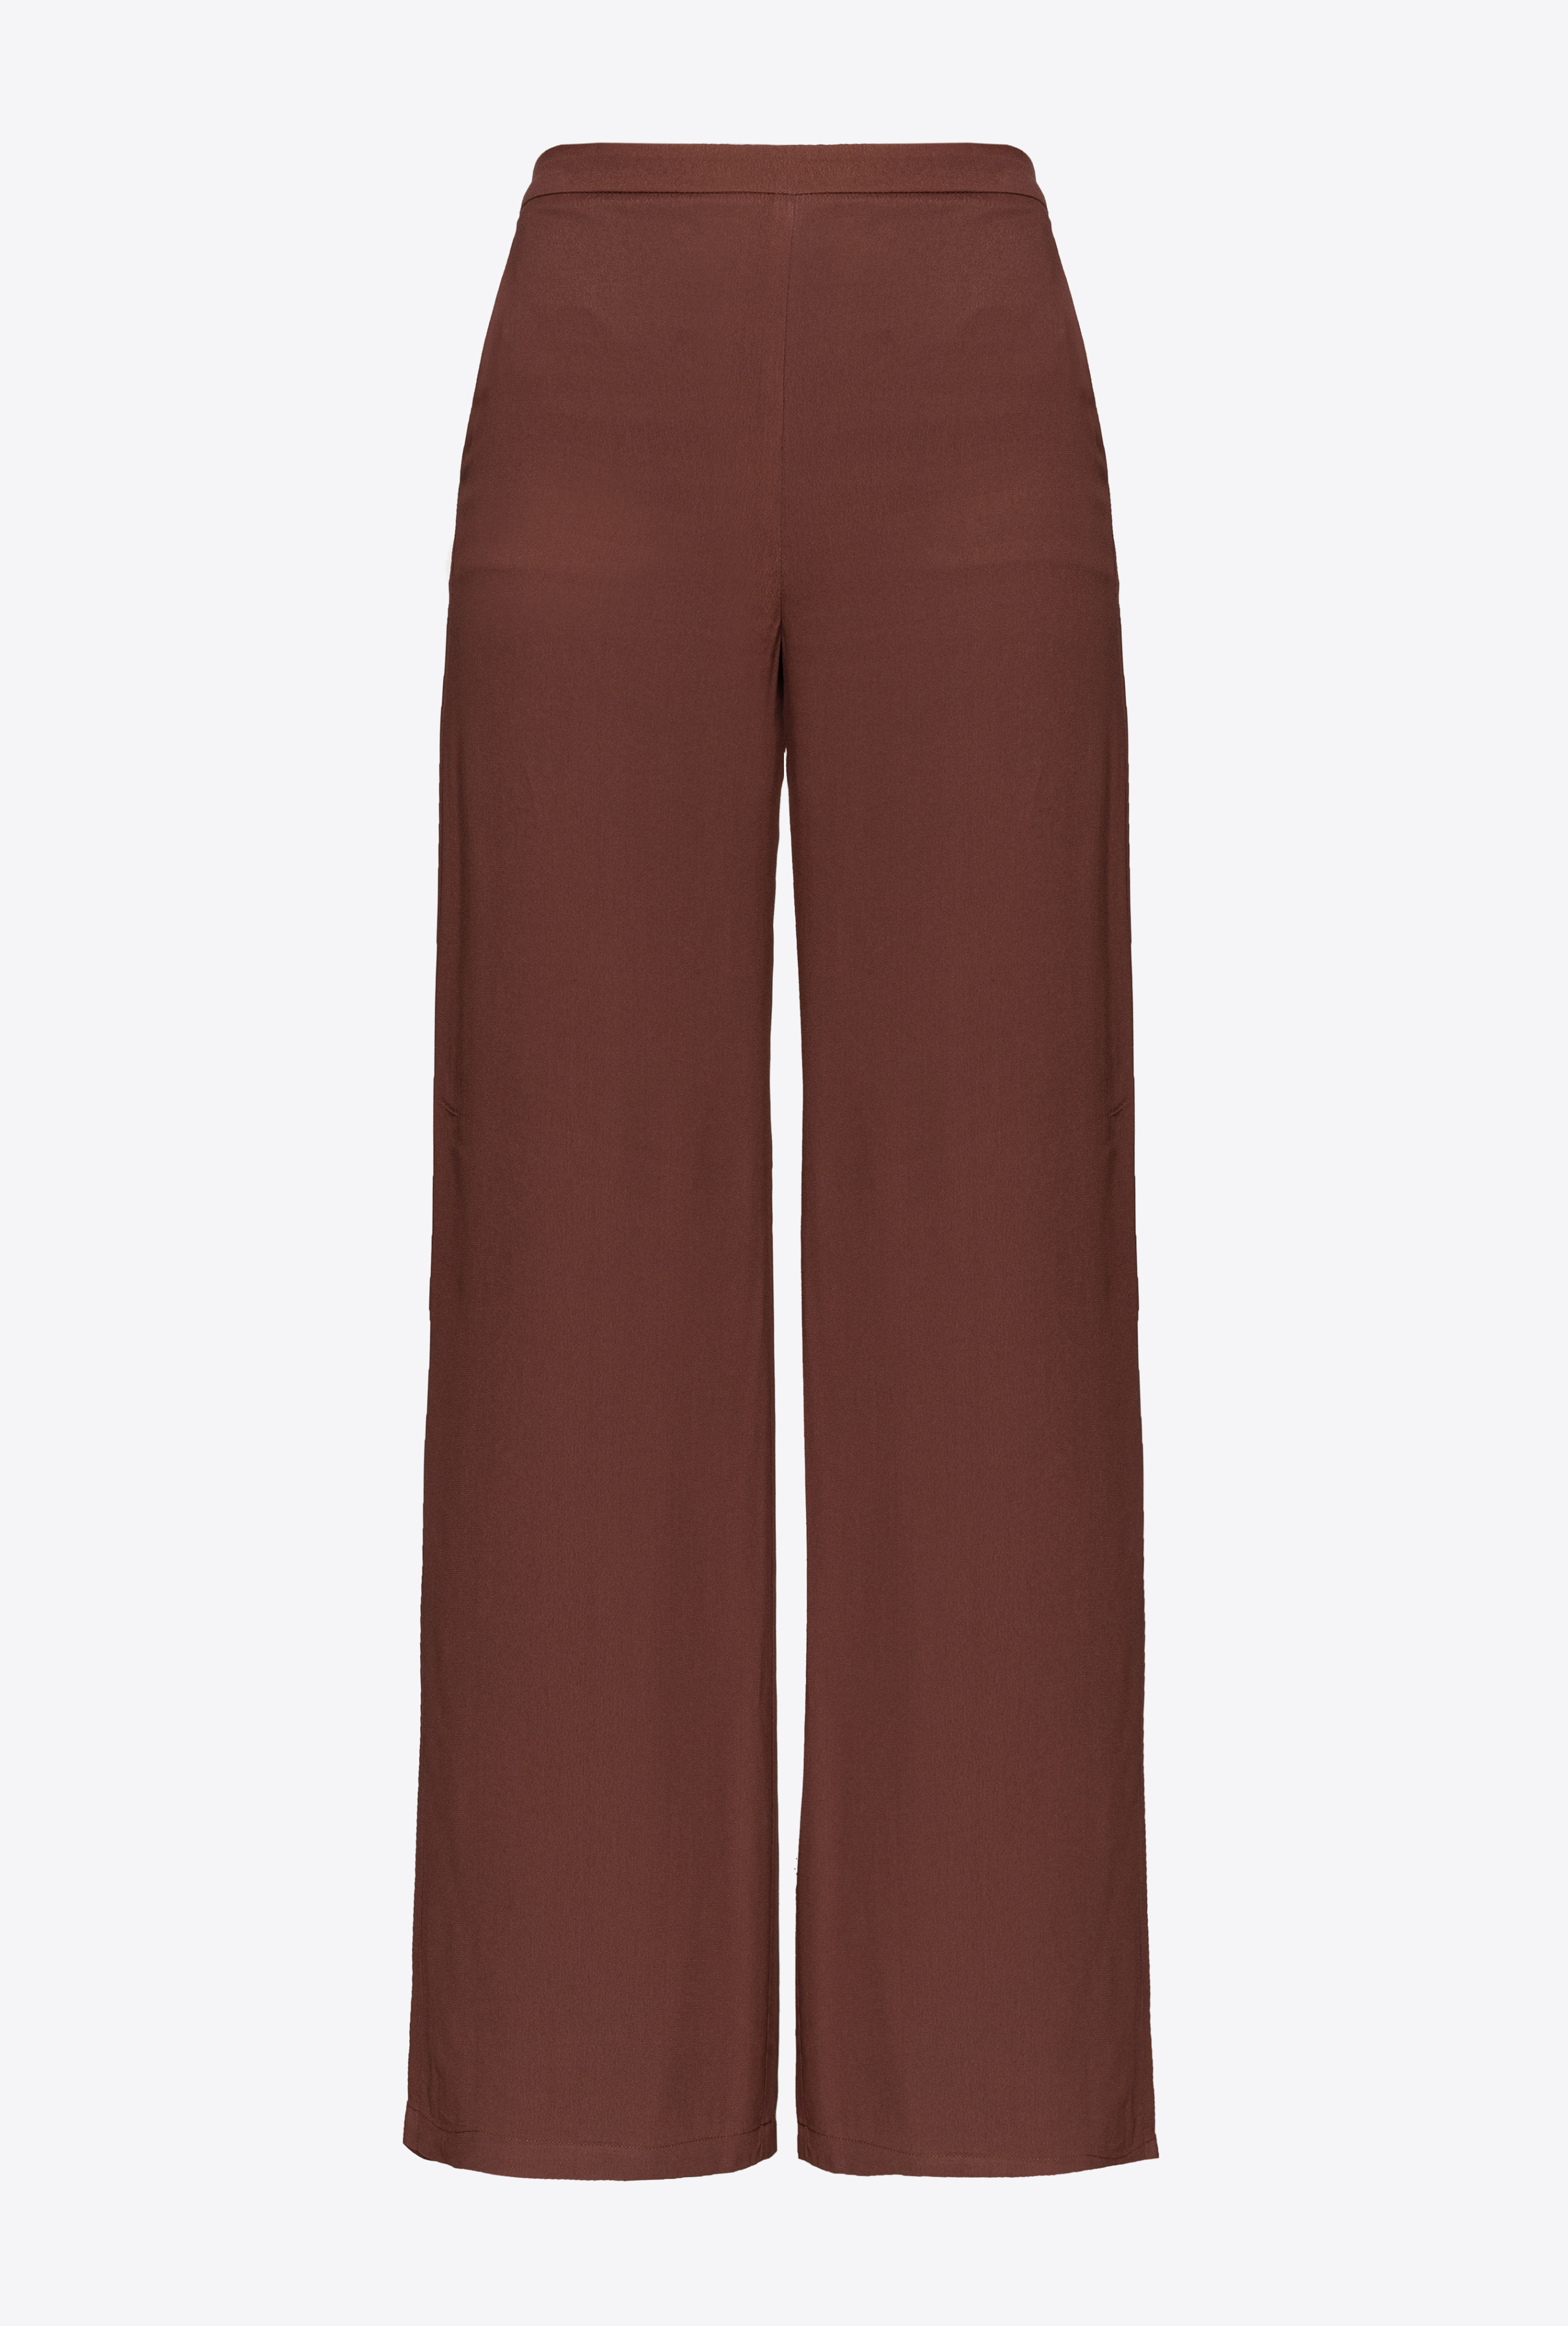 Pinko Crepe De Chine Pull-on Trousers In Chestnut Brown